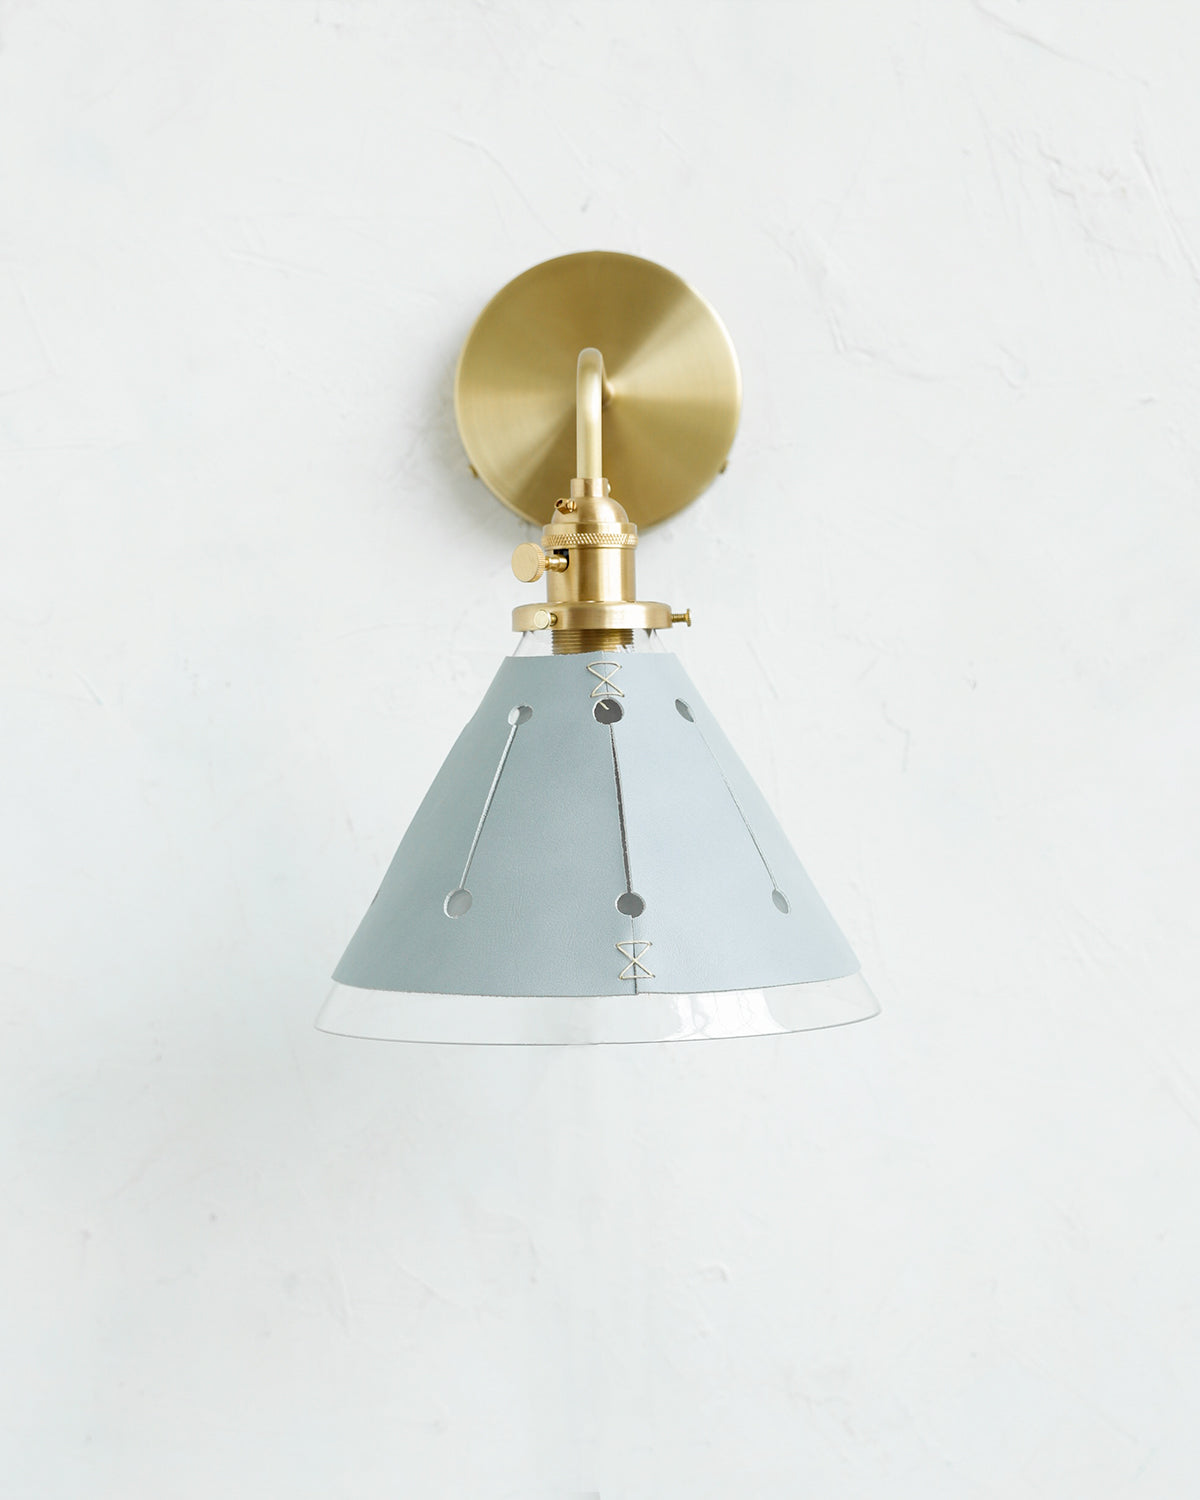 Classic hardwired satin brass wall sconce with cone glass diffuser and decorative handstitched leather shade